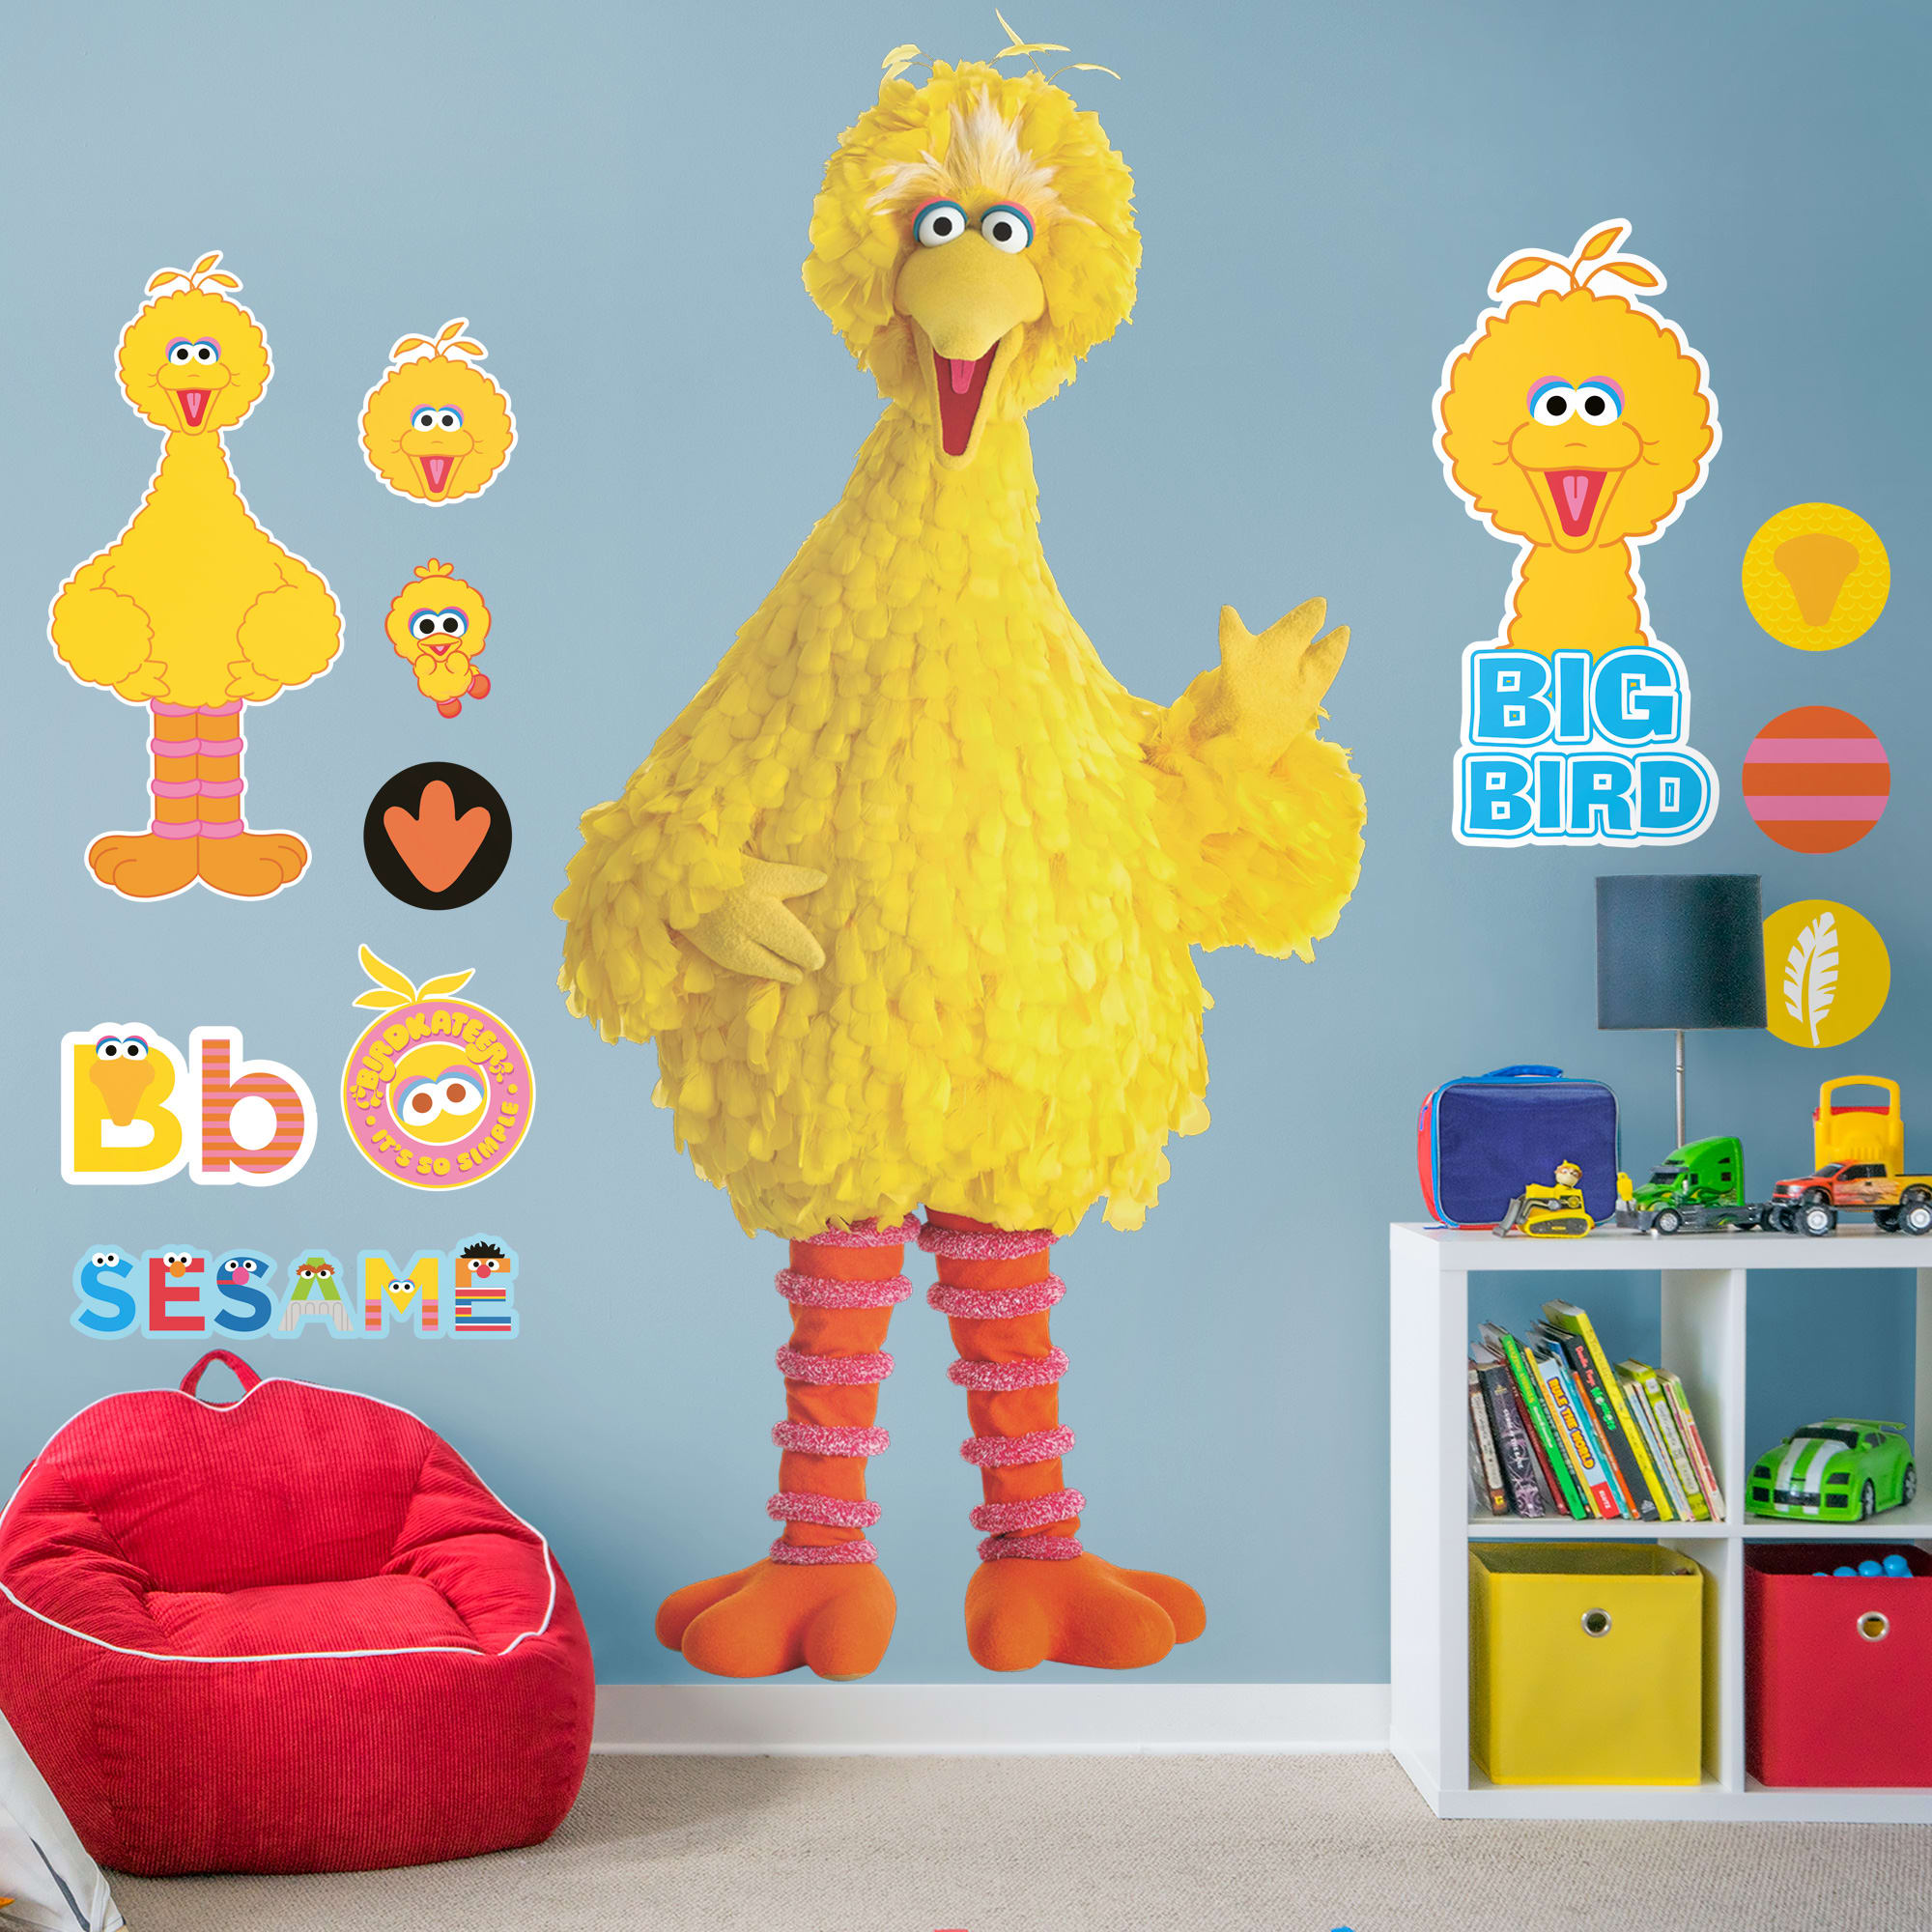 Big Bird - Officially Licensed Sesame Street Removable Wall Decal Life-Size Character + 11 Licensed Decals (45"W x 92"H) by Fath